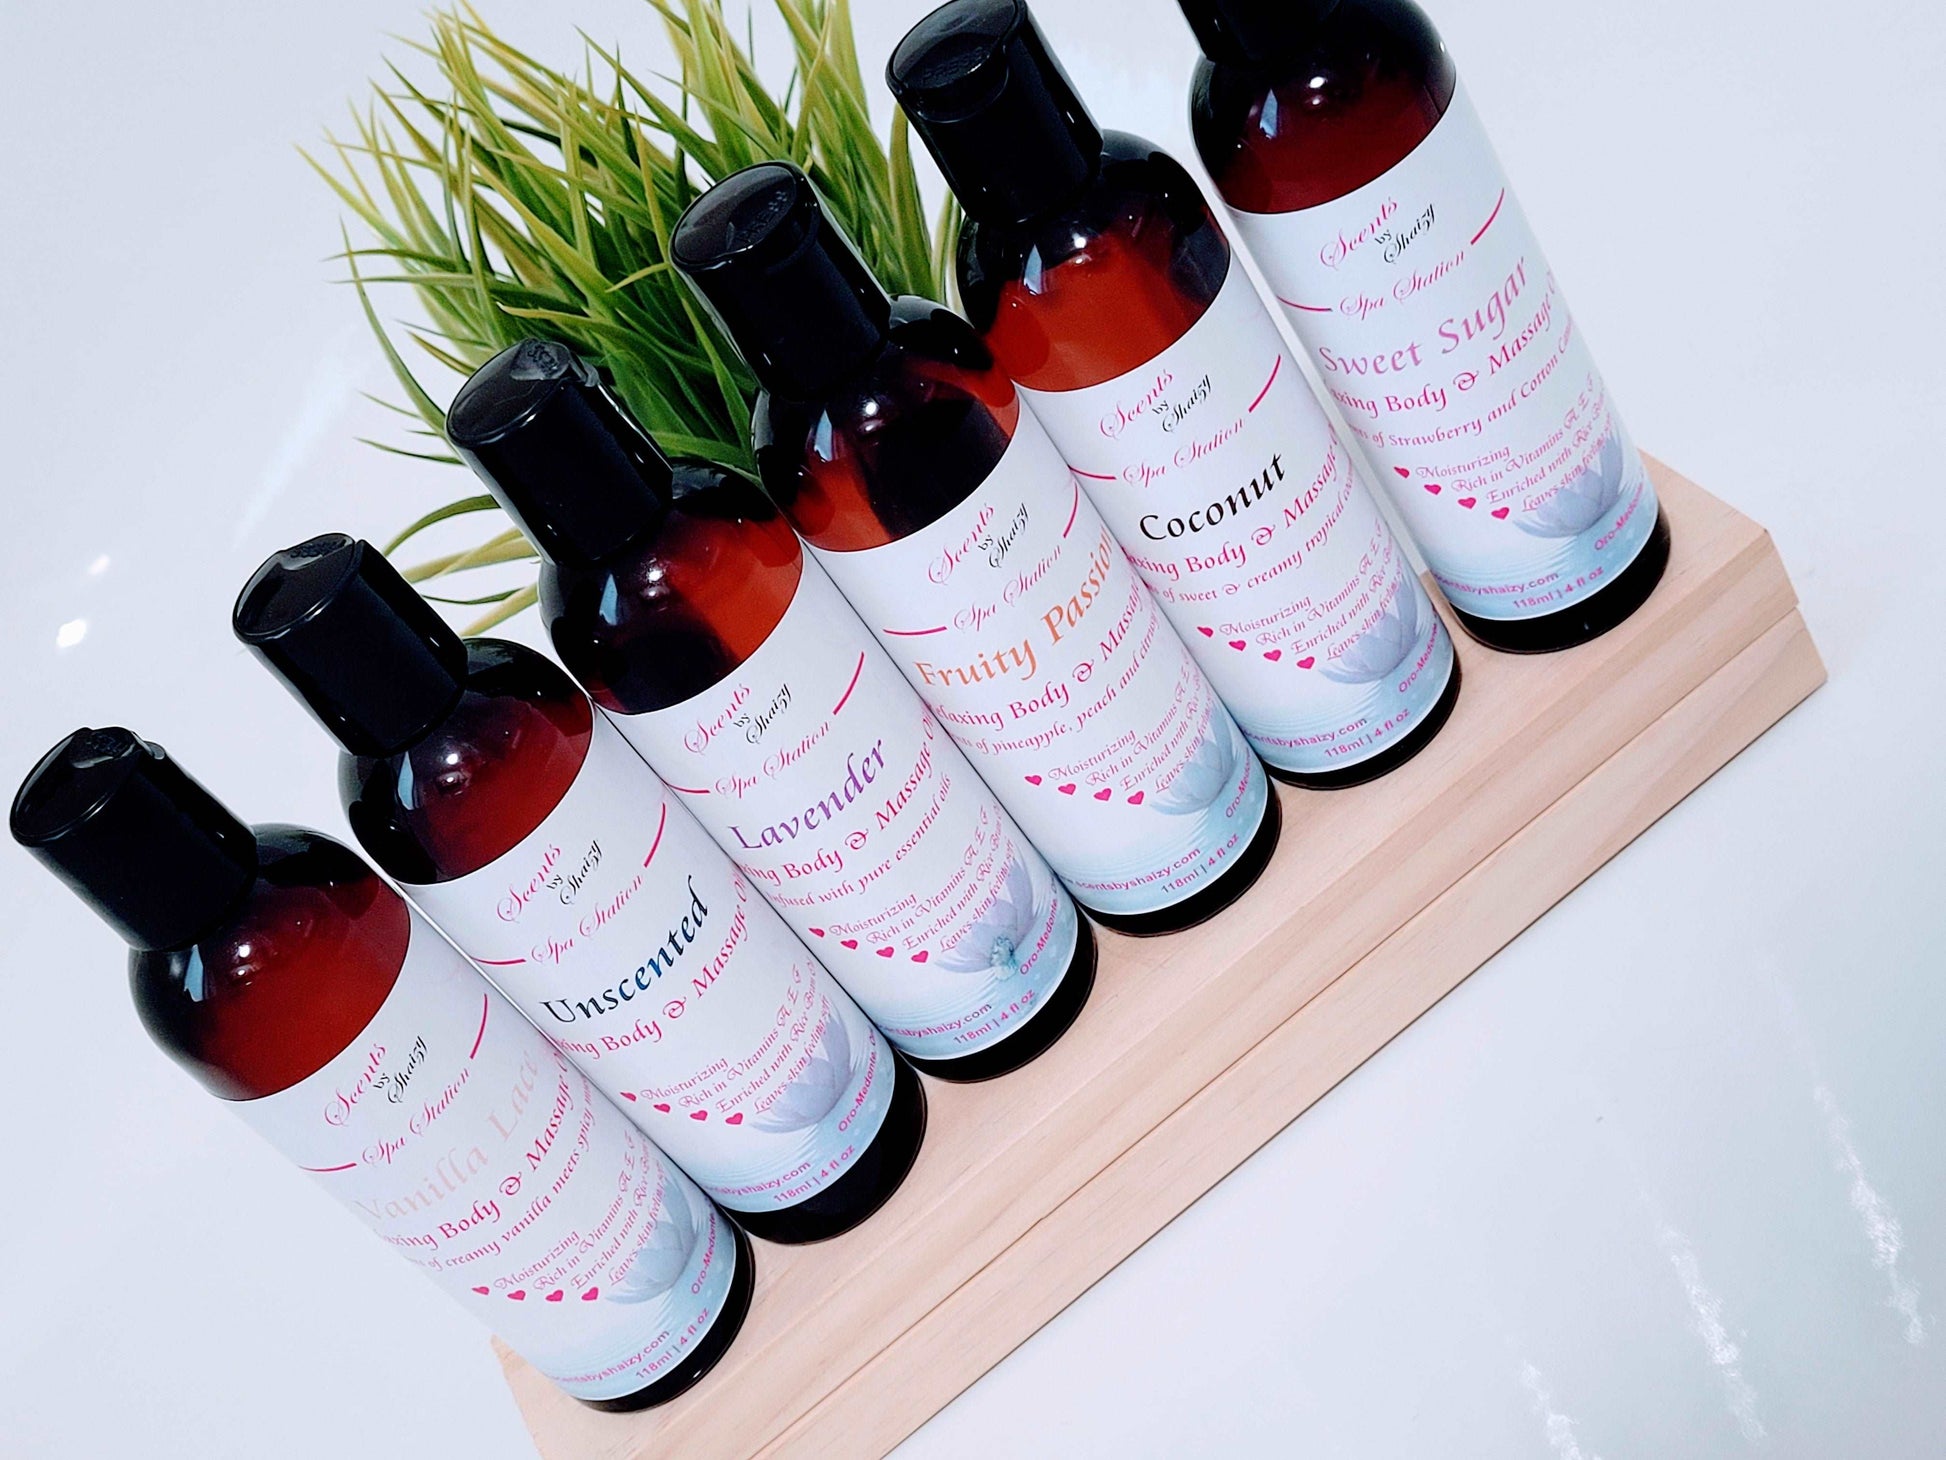 Body and Massage Oil | Scents by Shaizy